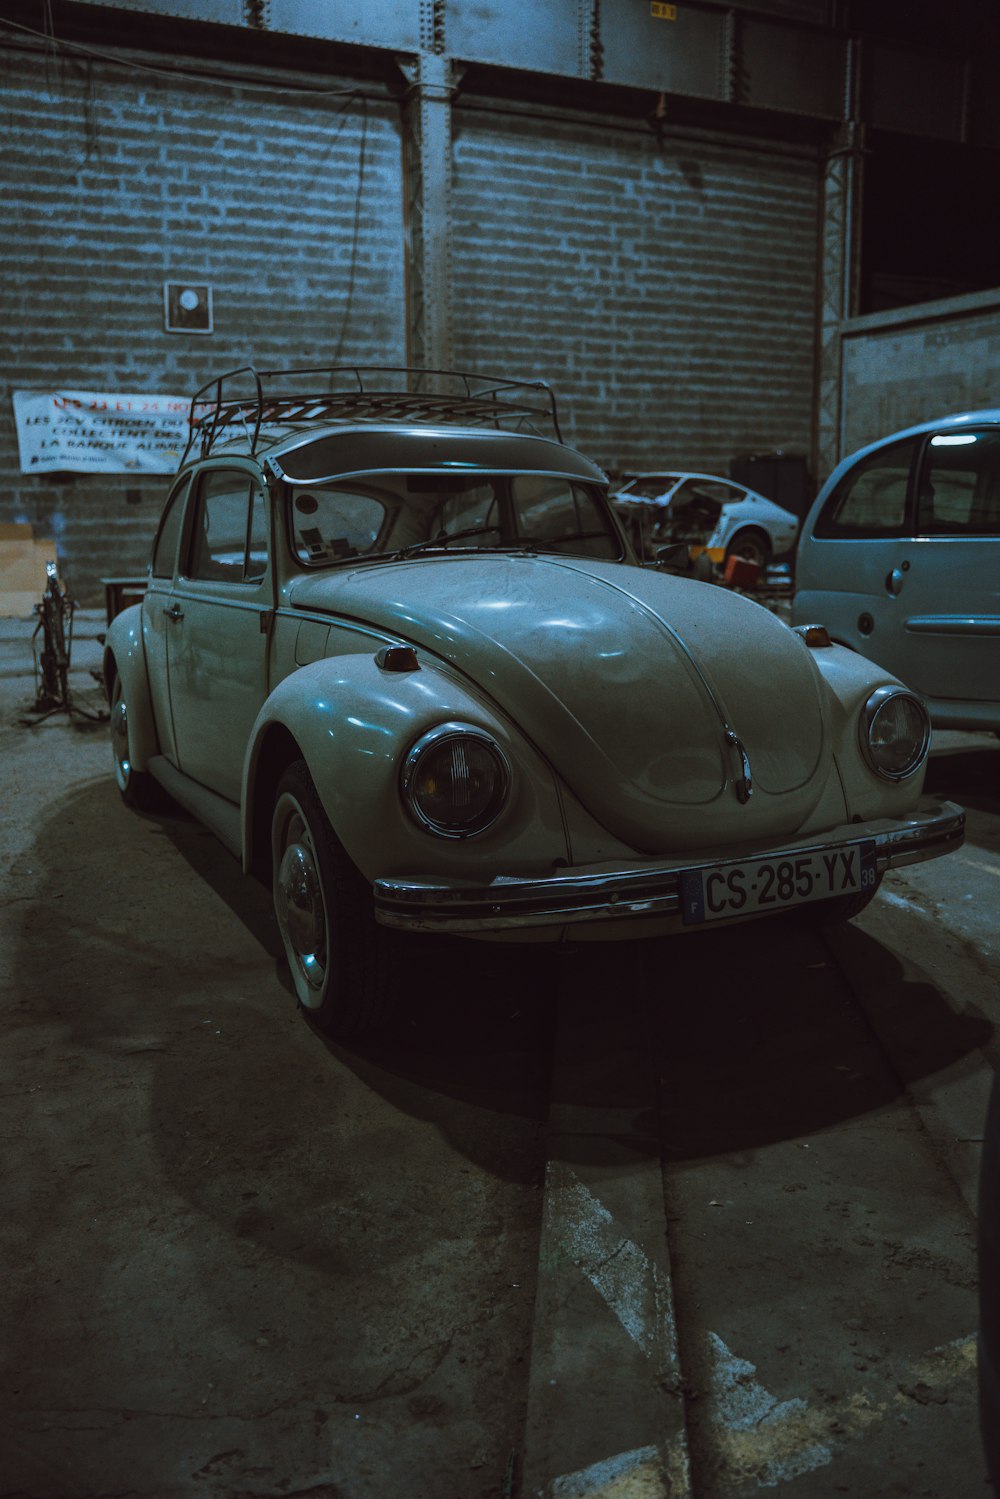 classic white Volkswagen coupe parked inside building